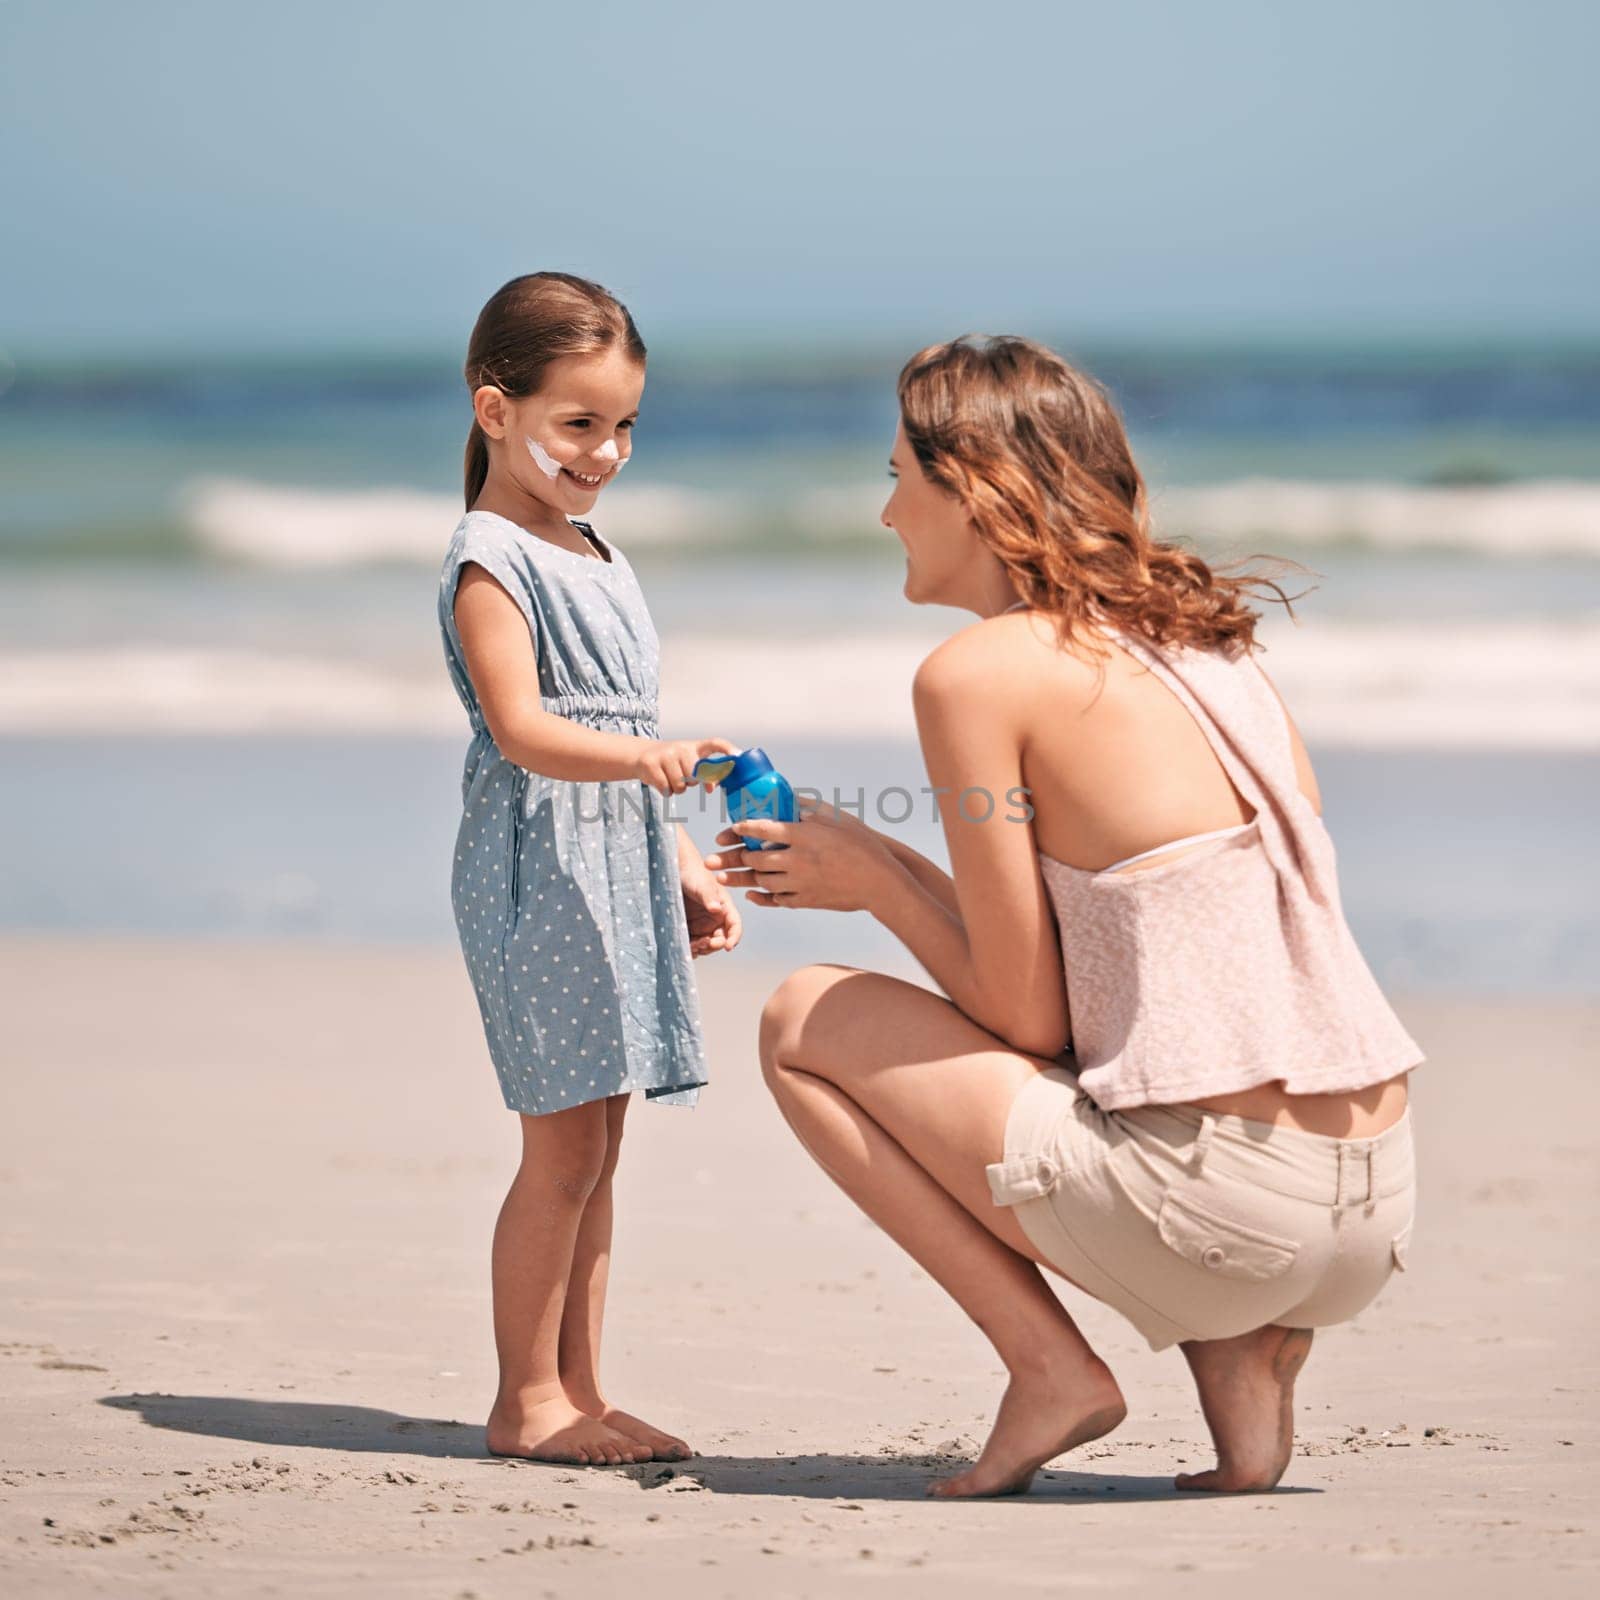 Mother, child and sunscreen with skincare health on beach for summer holiday, tropical island or bonding. Female person, daughter and lotion application at California seaside, protection or safety.